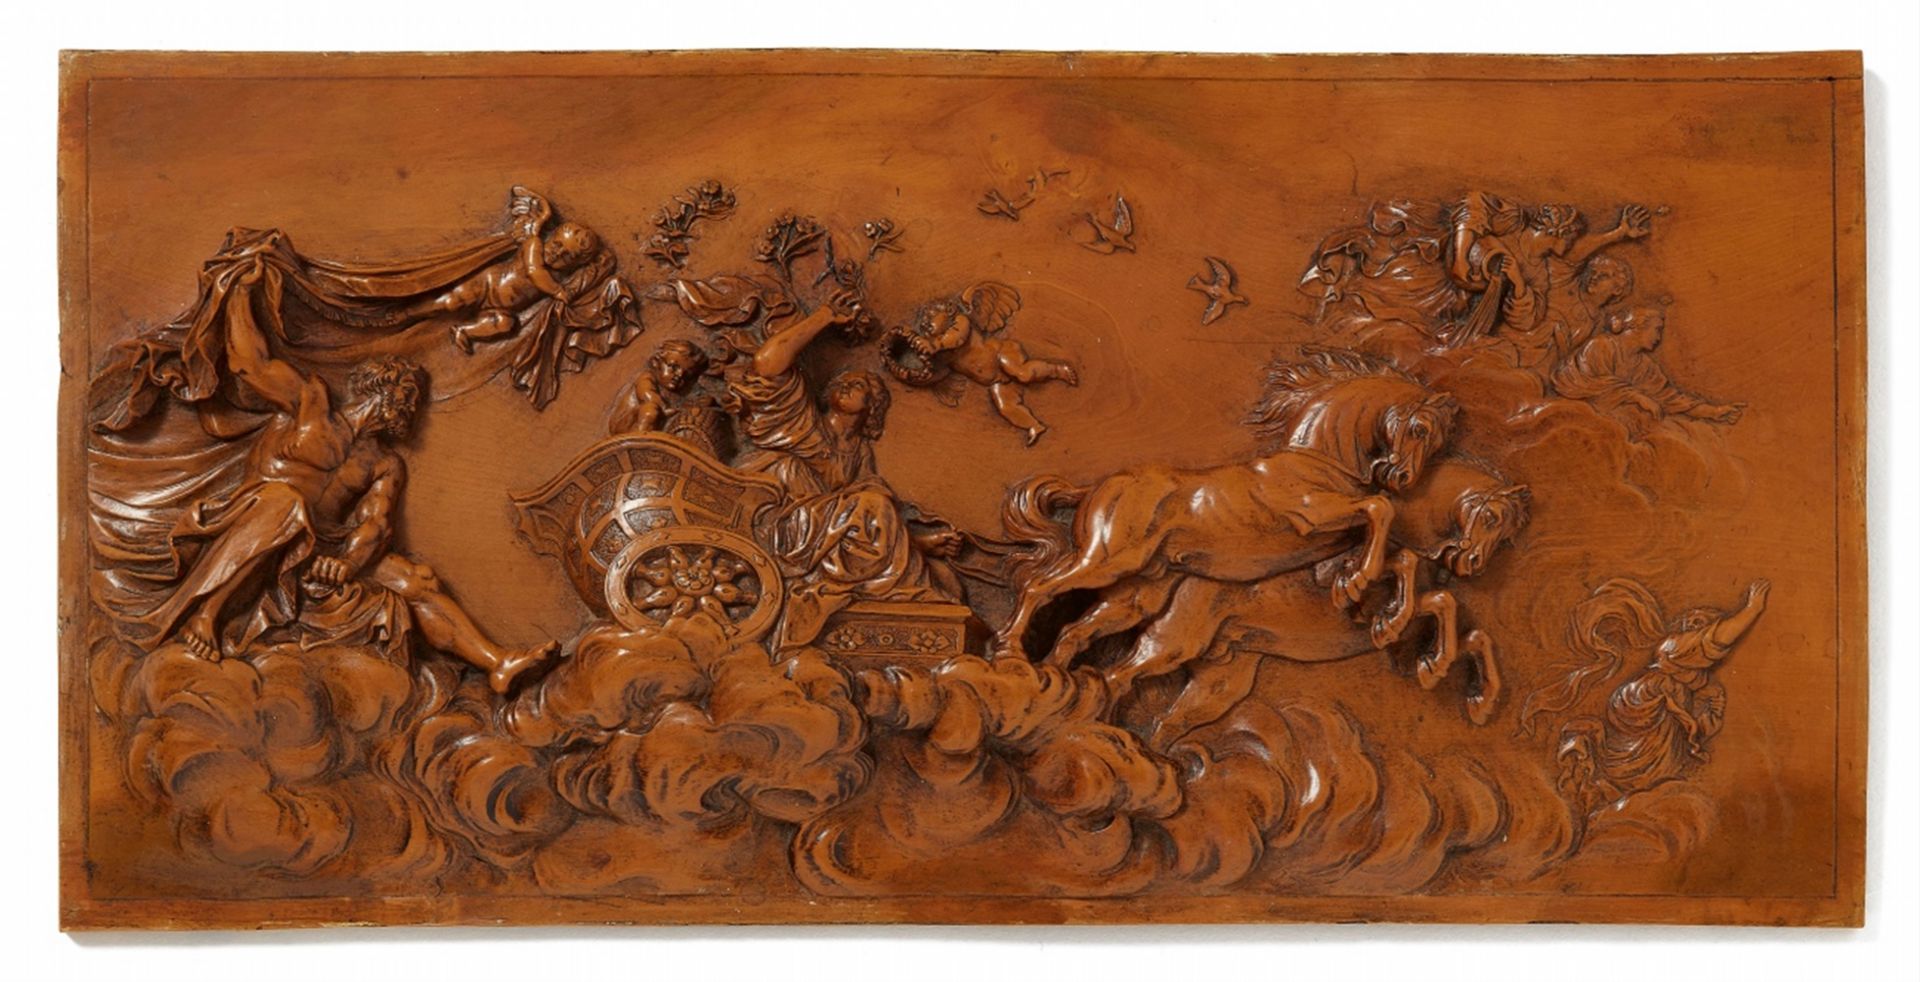 A 17th century Flemish boxwood relief with Neptune and Amphitrite